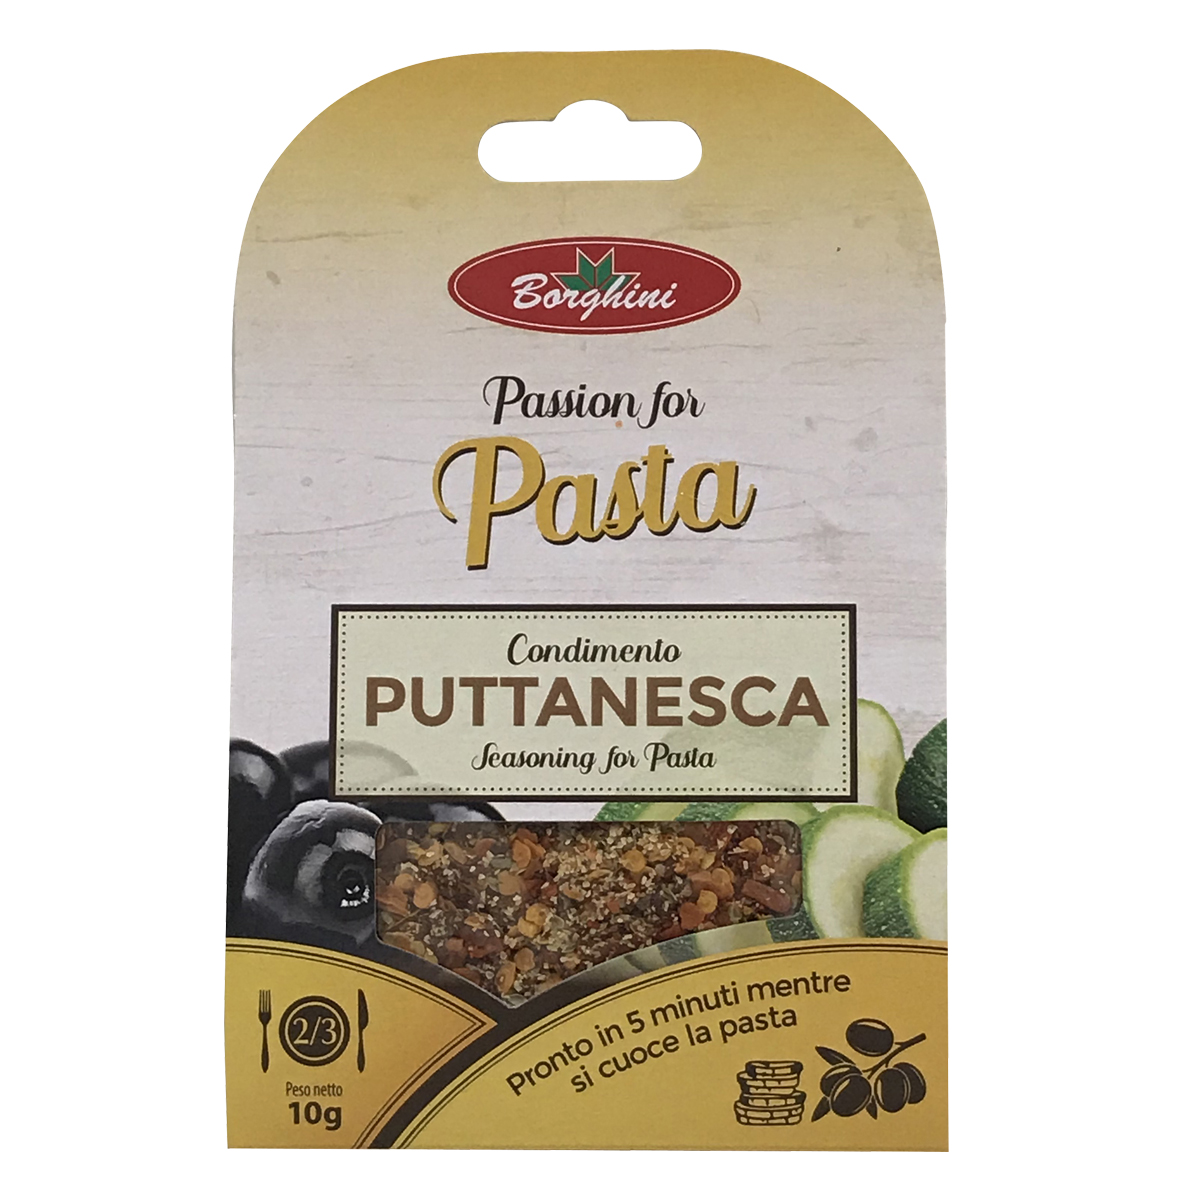 Passion for pasta Puttanesca herb mix